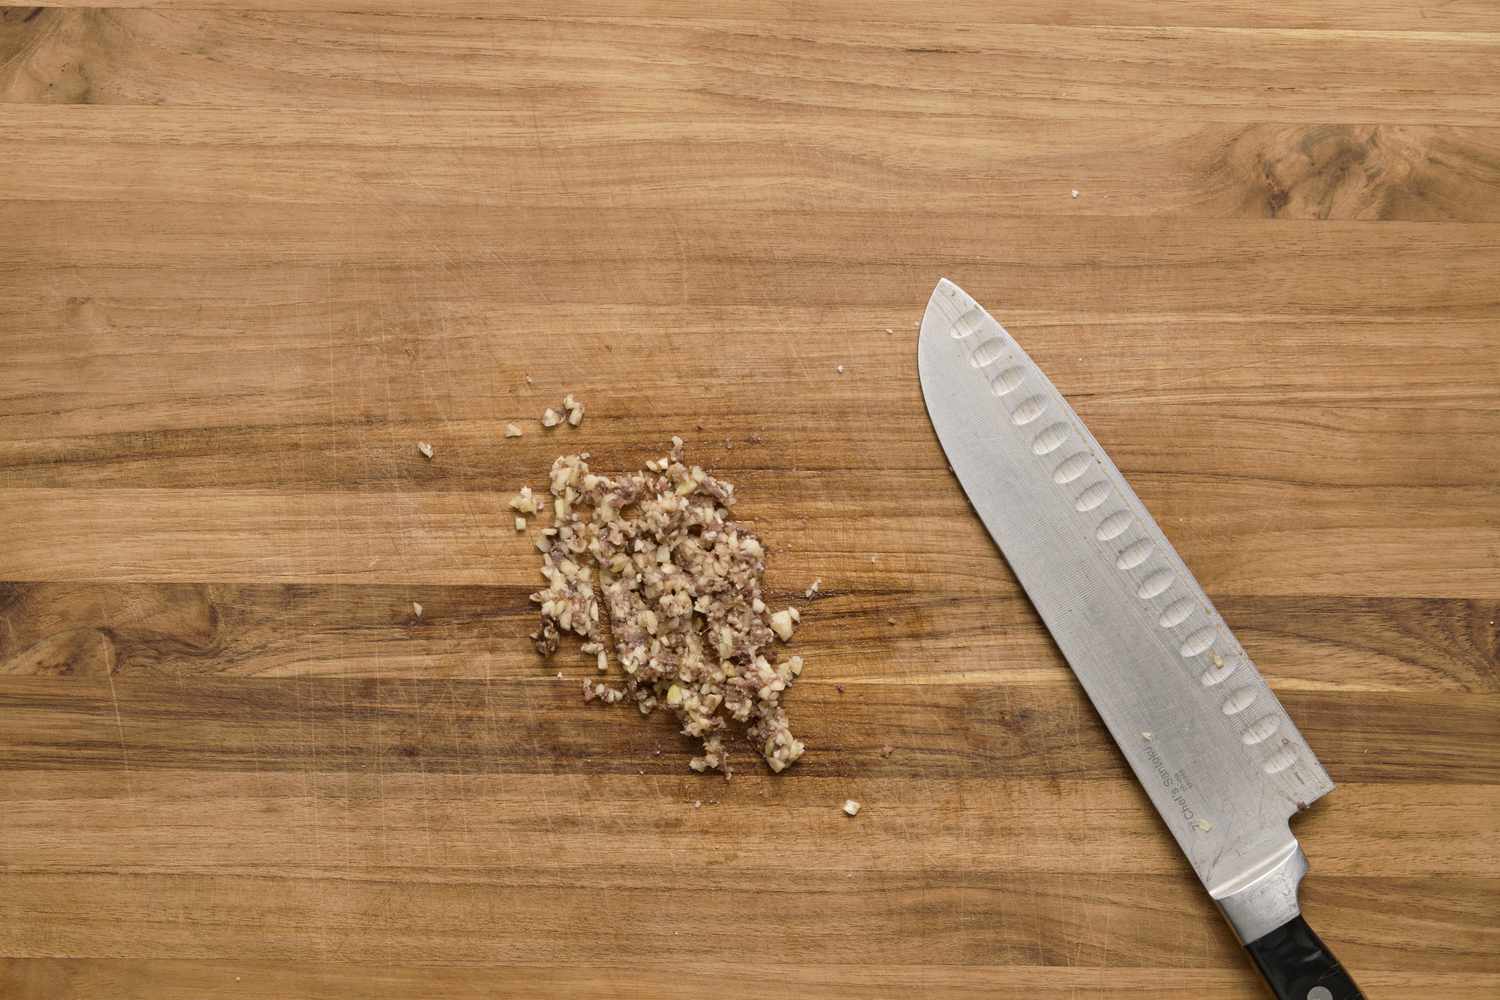 A pasta of anchovies, garlic, and salt on a cutting board next to a knife